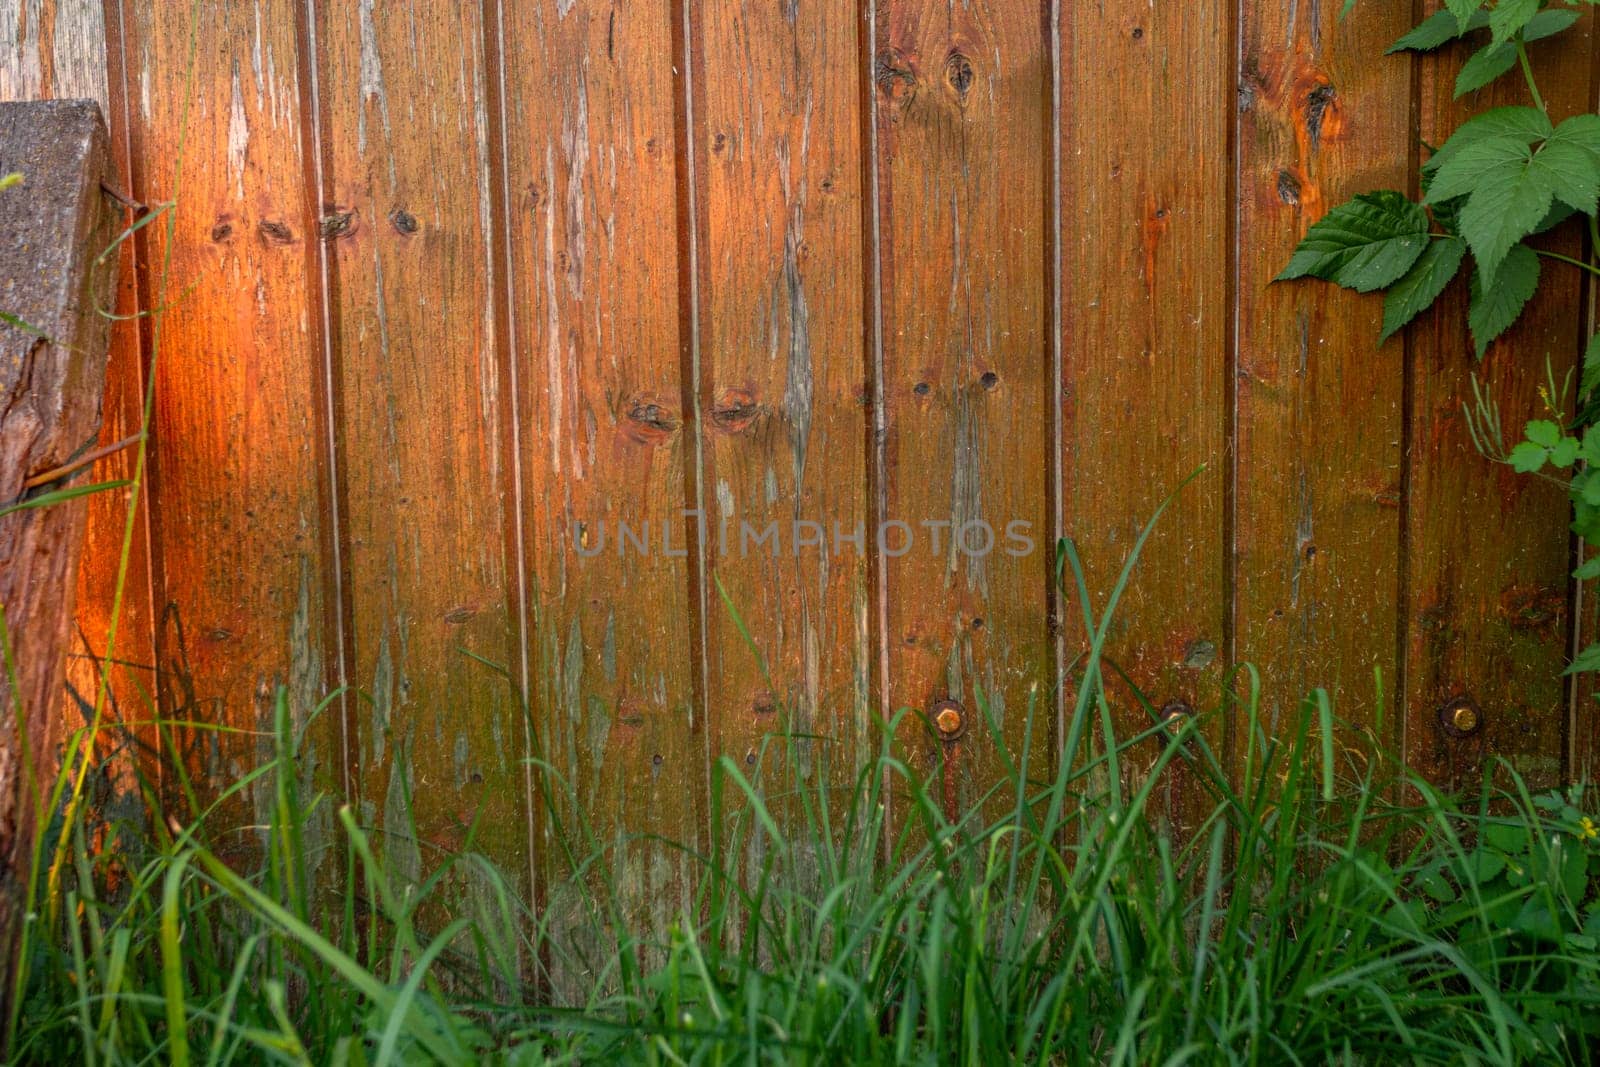 Wooden brown fence and green grass. Peeling paint on the fence. Rural landscape. Country life.